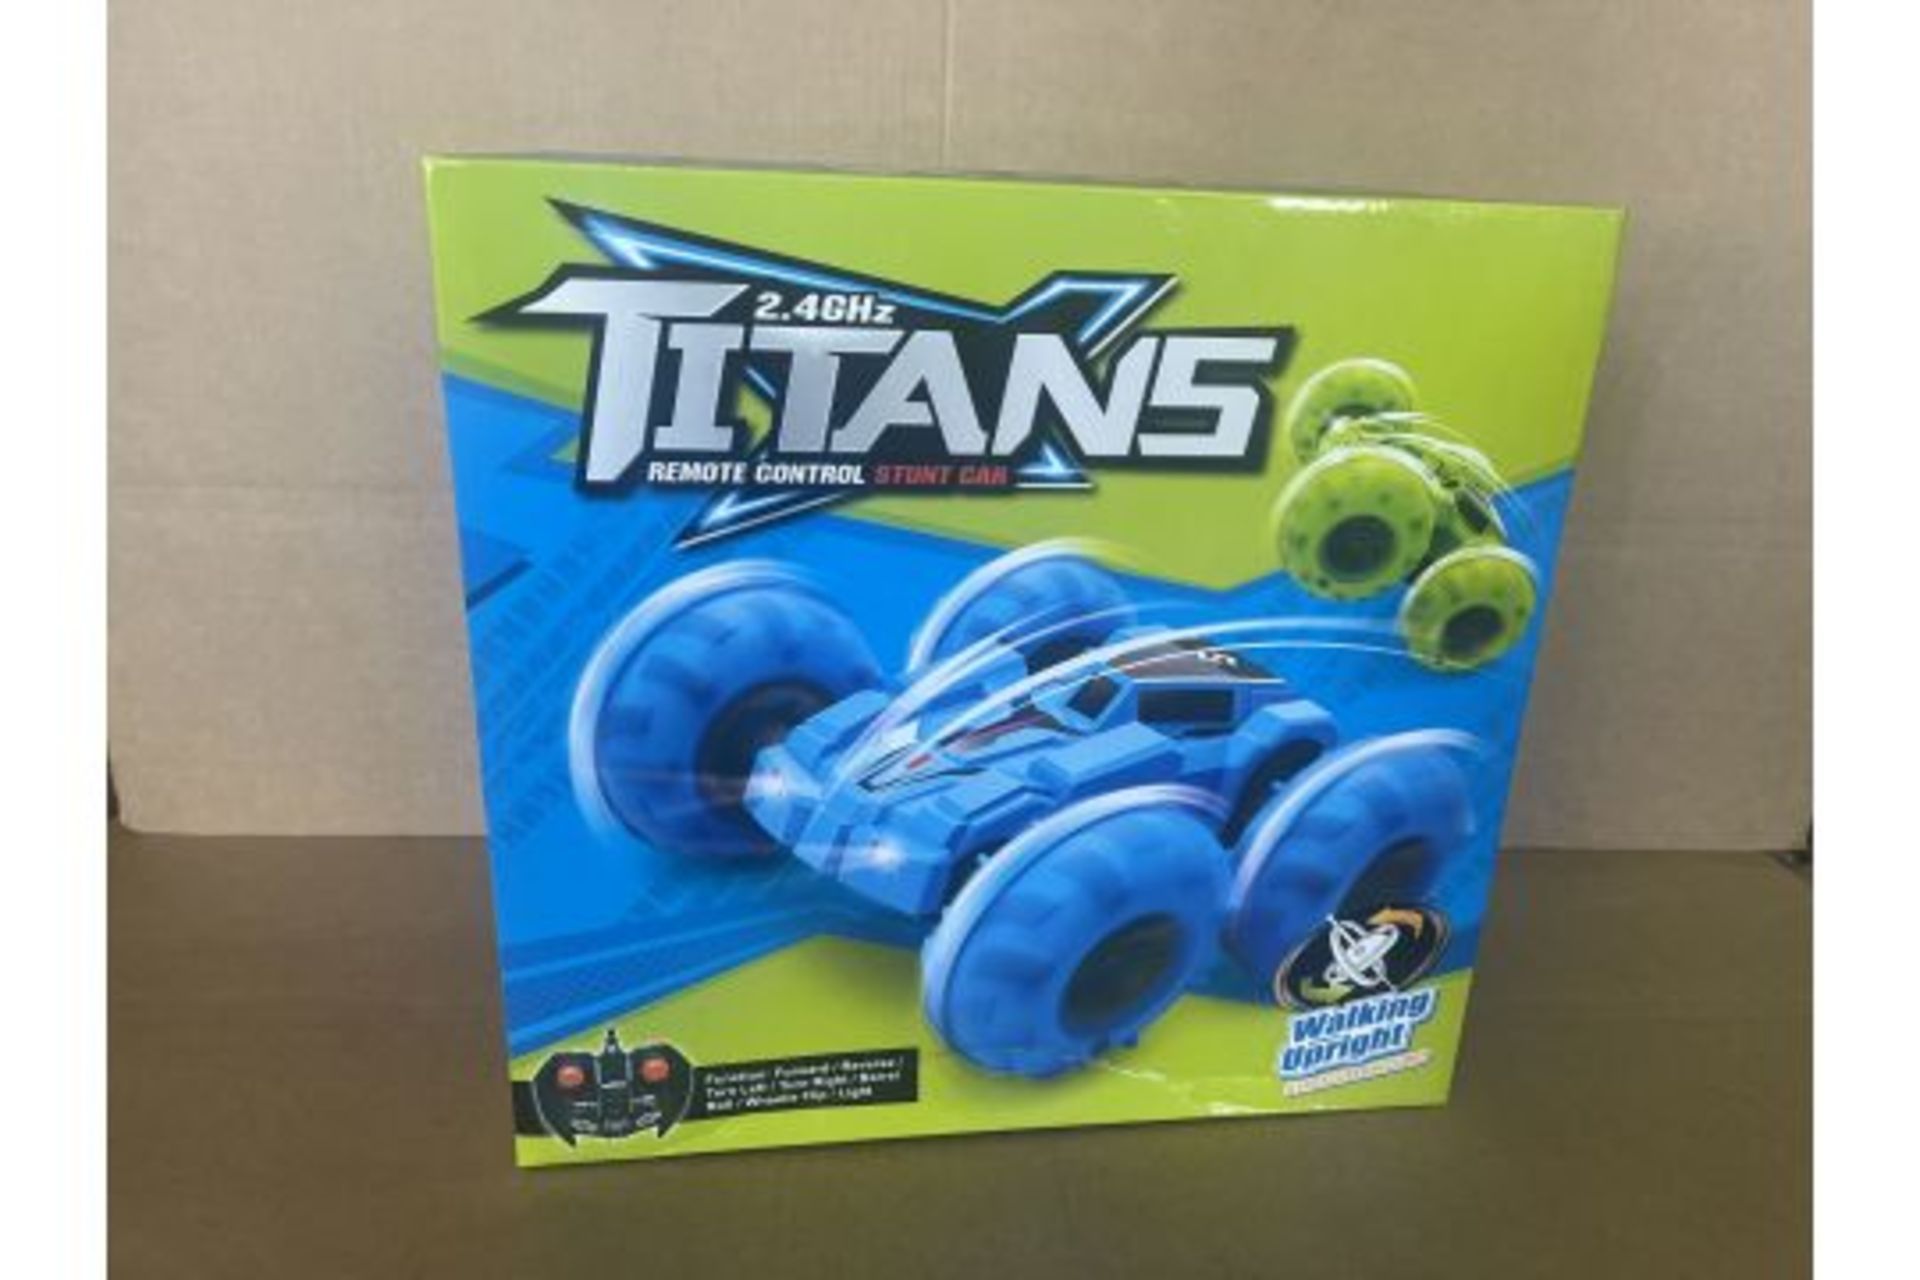 8 X BRAND NEW TITANS 2.4GHZ REMOTE CONTROL STUNT CAR WITH WALKING UPRIGHT, GYROSCOPE INCLUDED R15